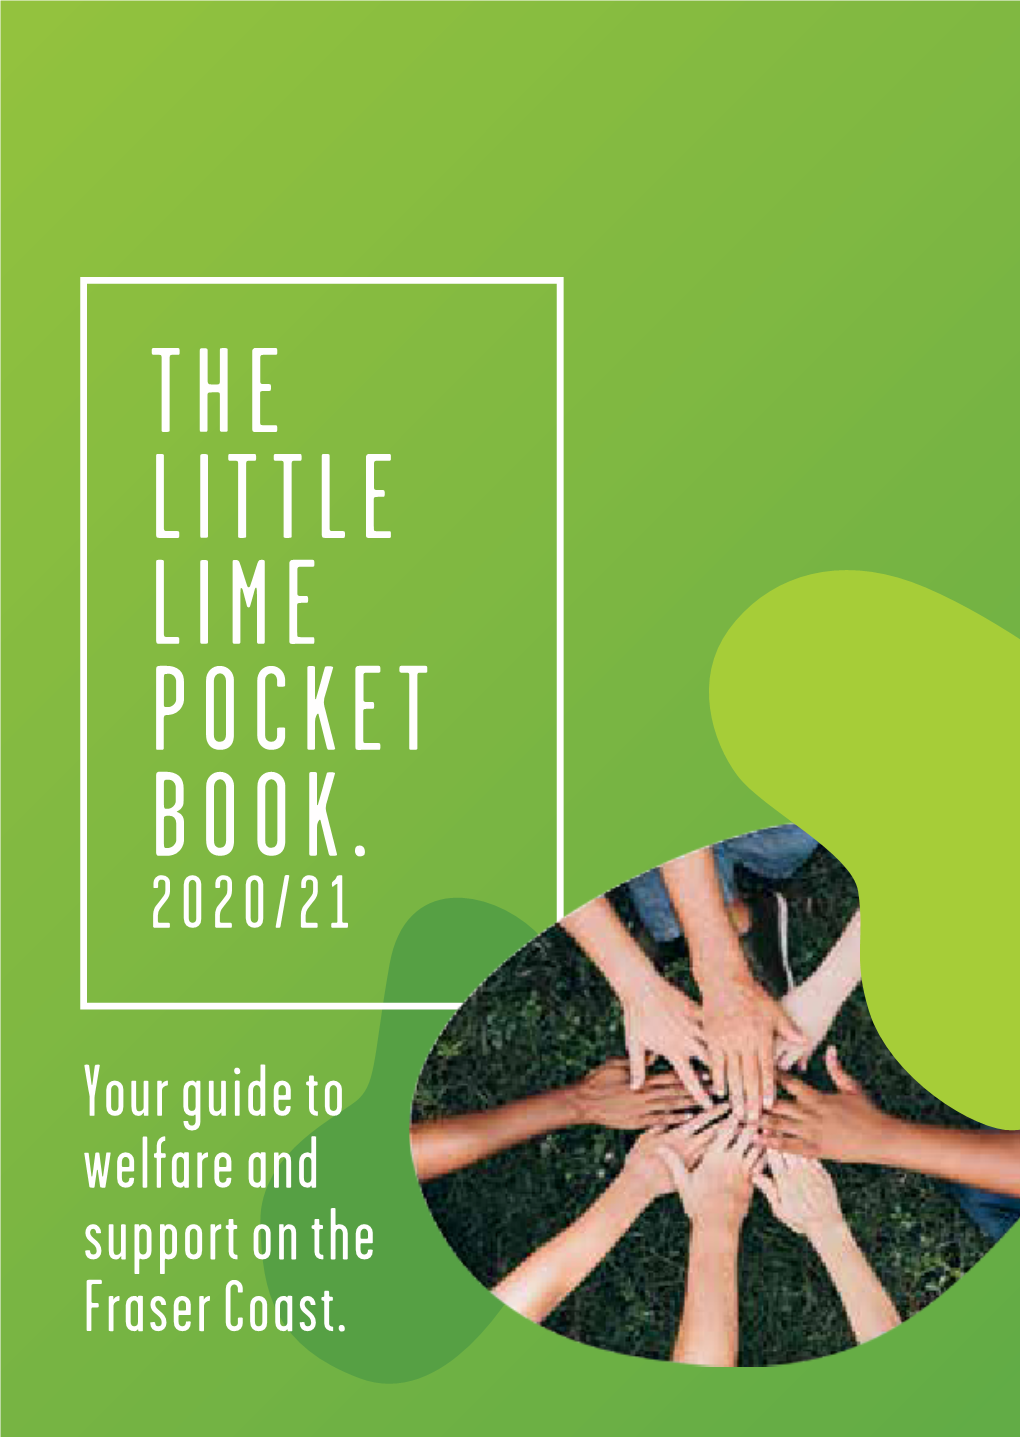 The Little Lime Pocket Book. 2020/21